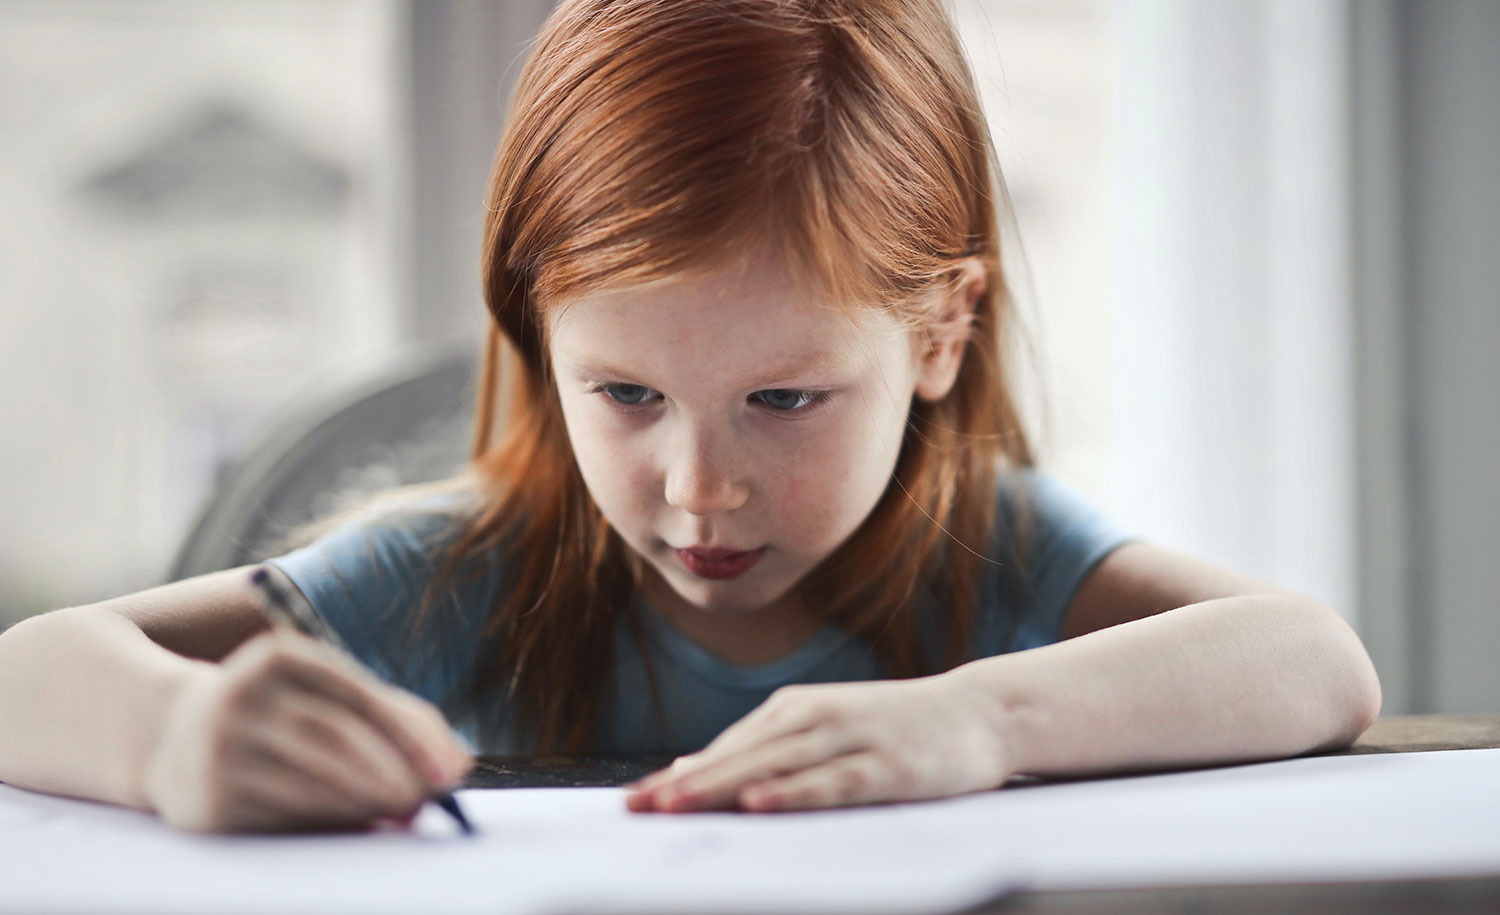 A young girl writes in a notebook